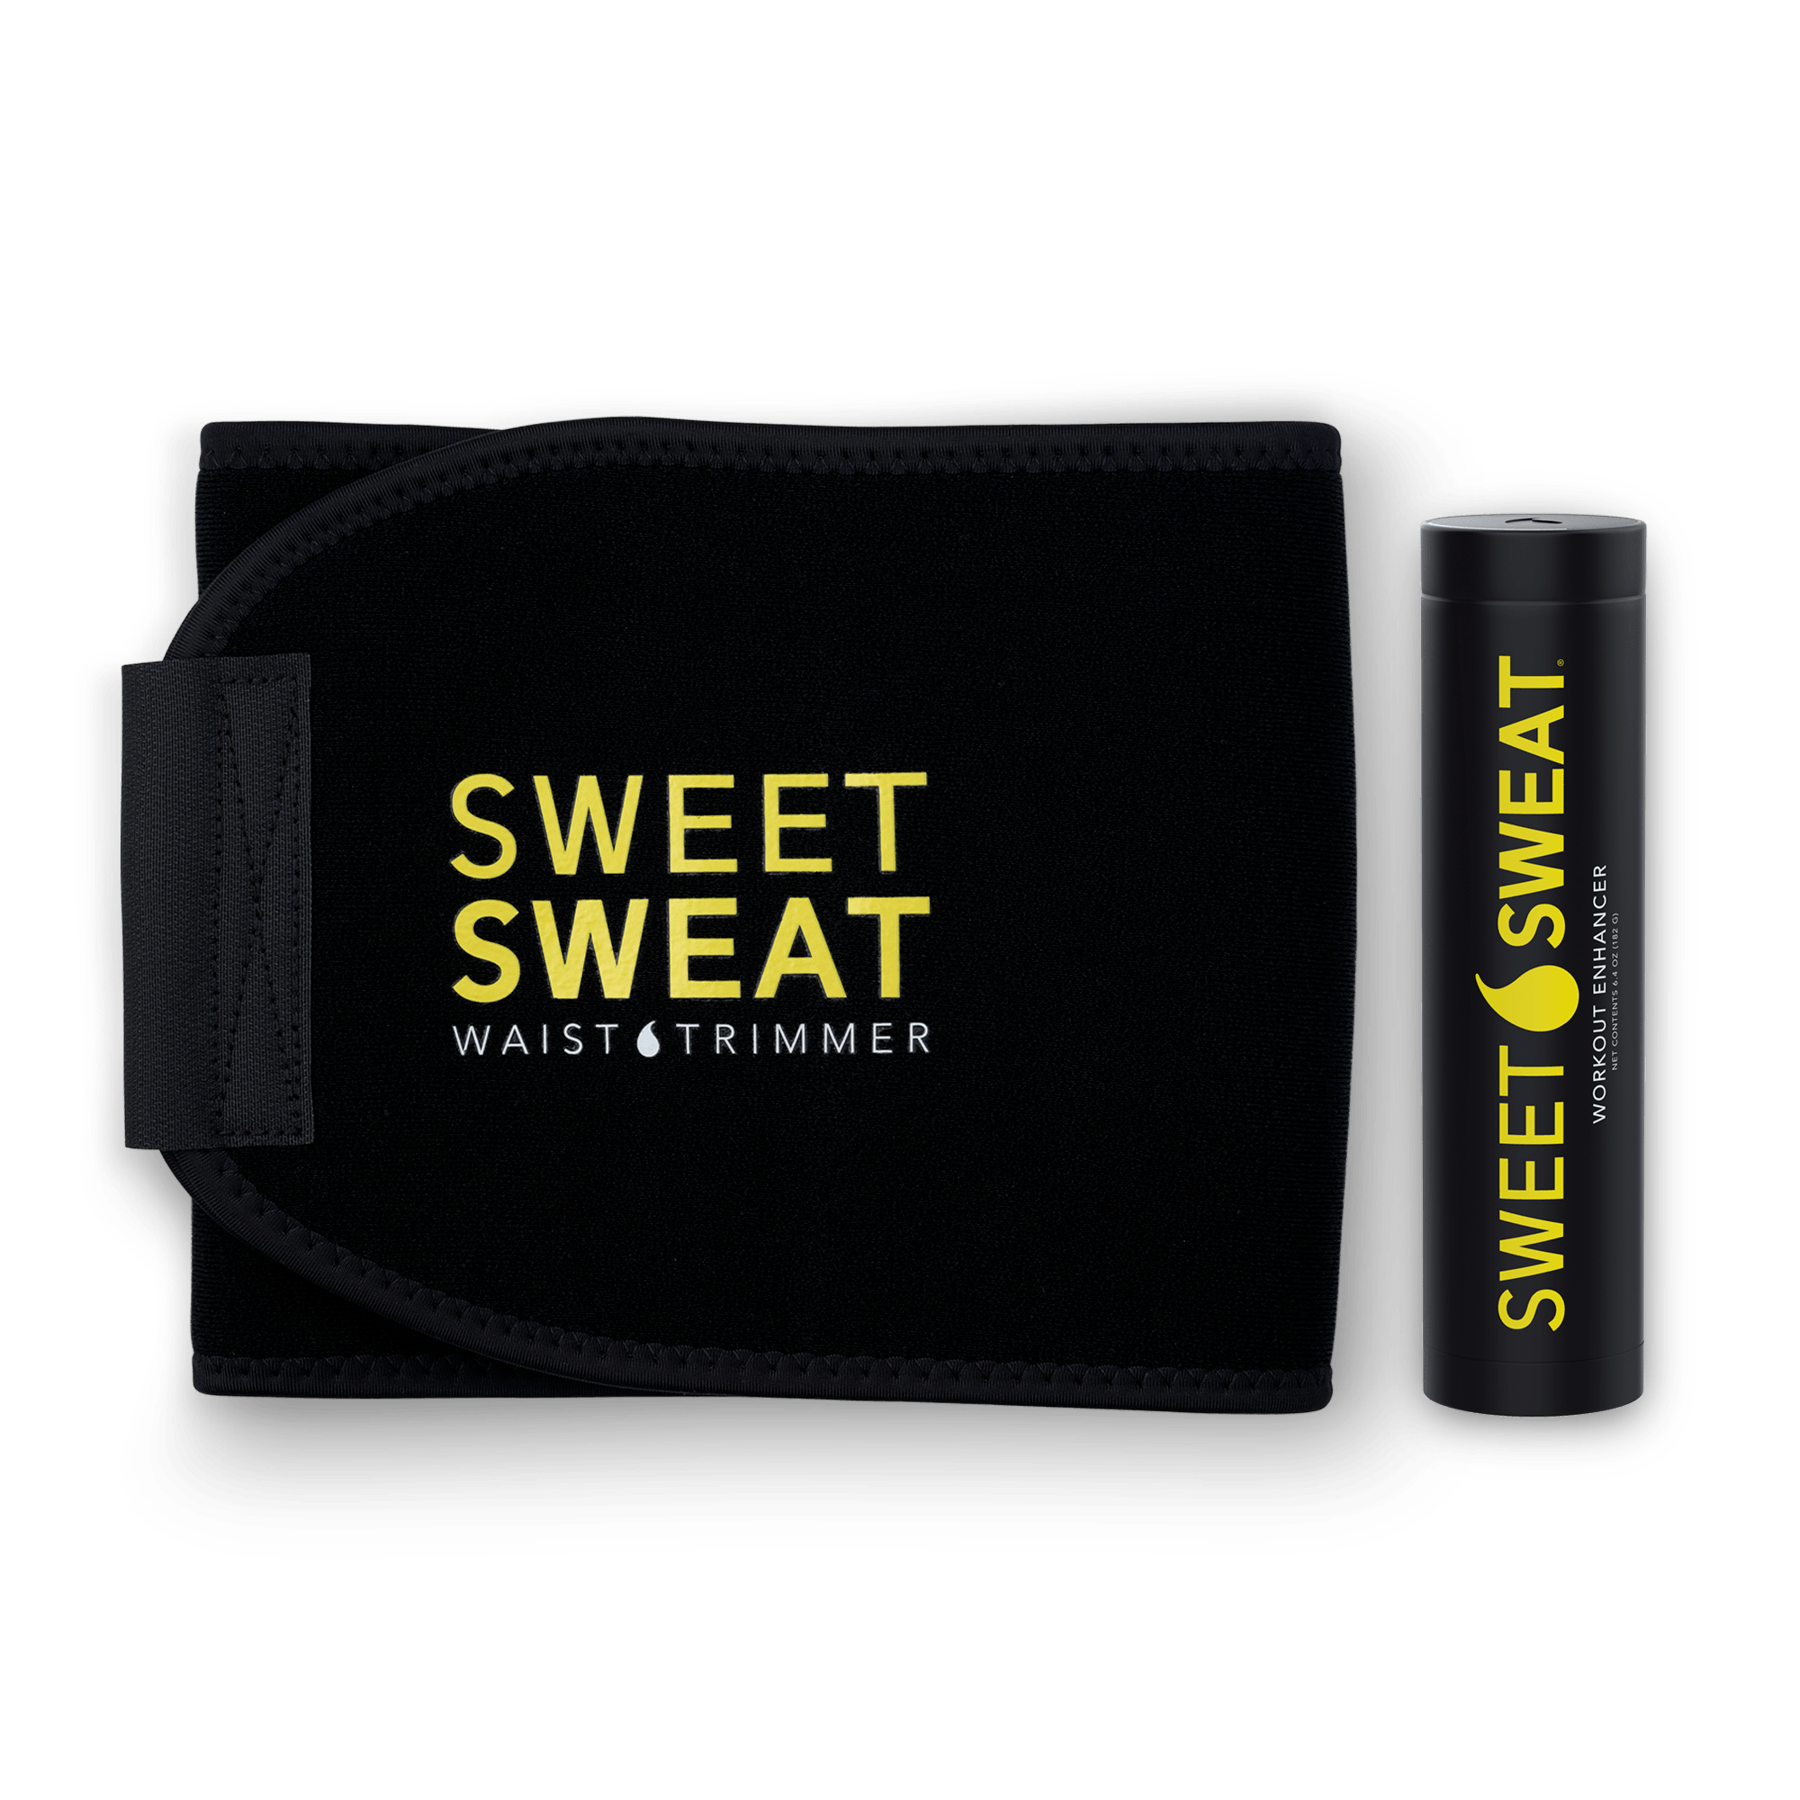 Sweet Sweat® workout kit with Sweet Sweat® Bundle with Trimmer & Sweet Sweat® Stick.